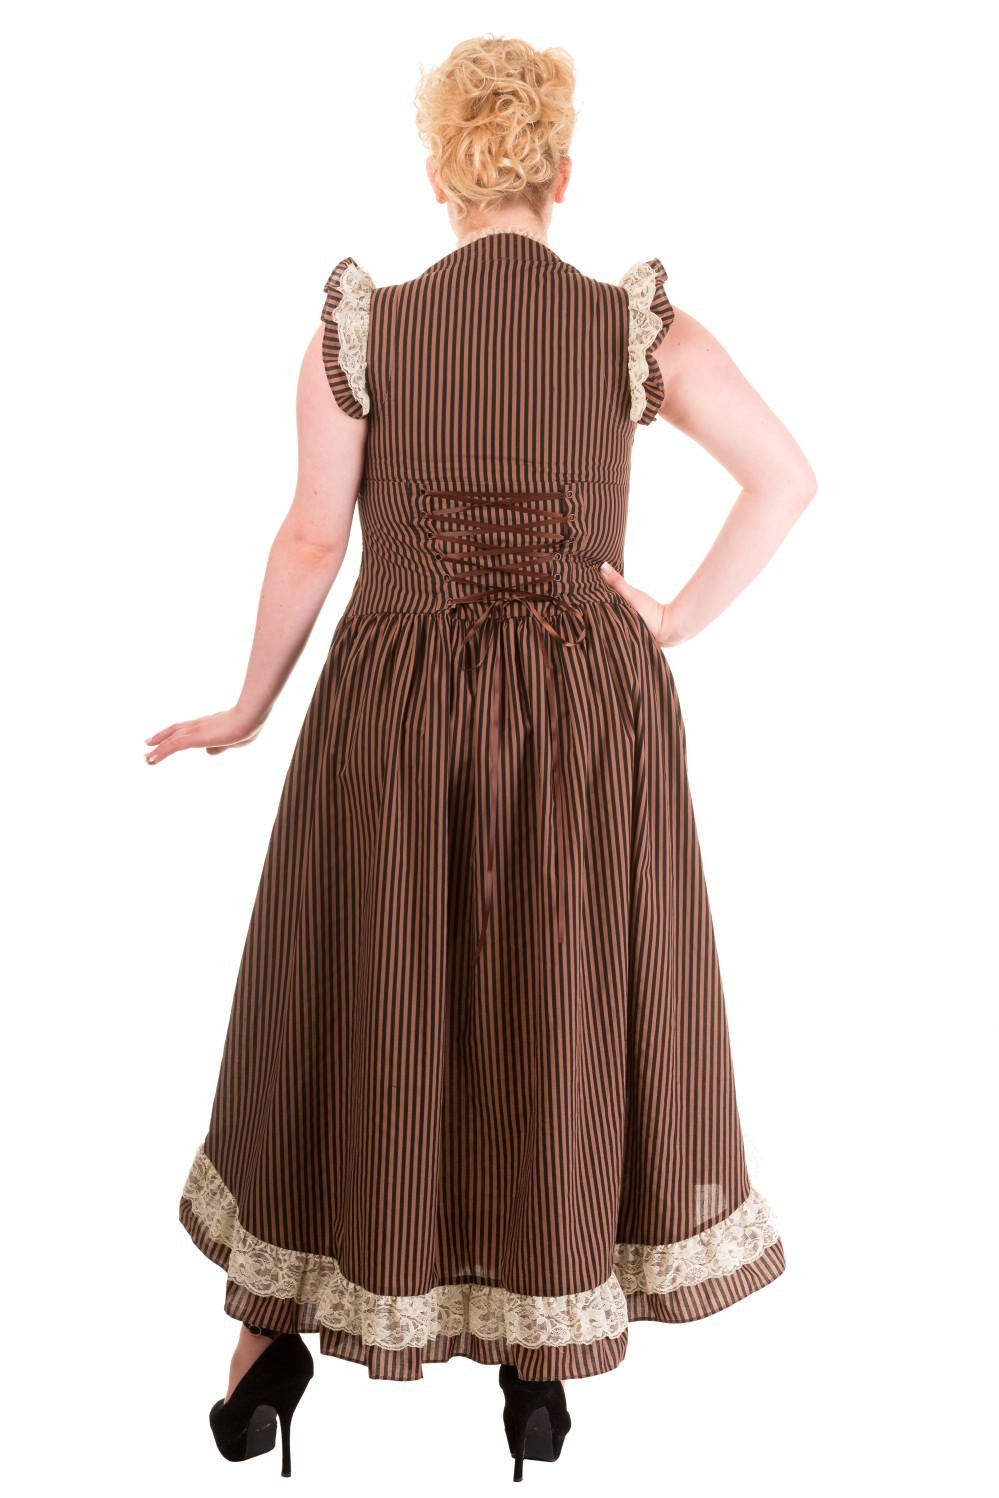 Victorian Steampunk Dress in Stripe - SOLD OUT